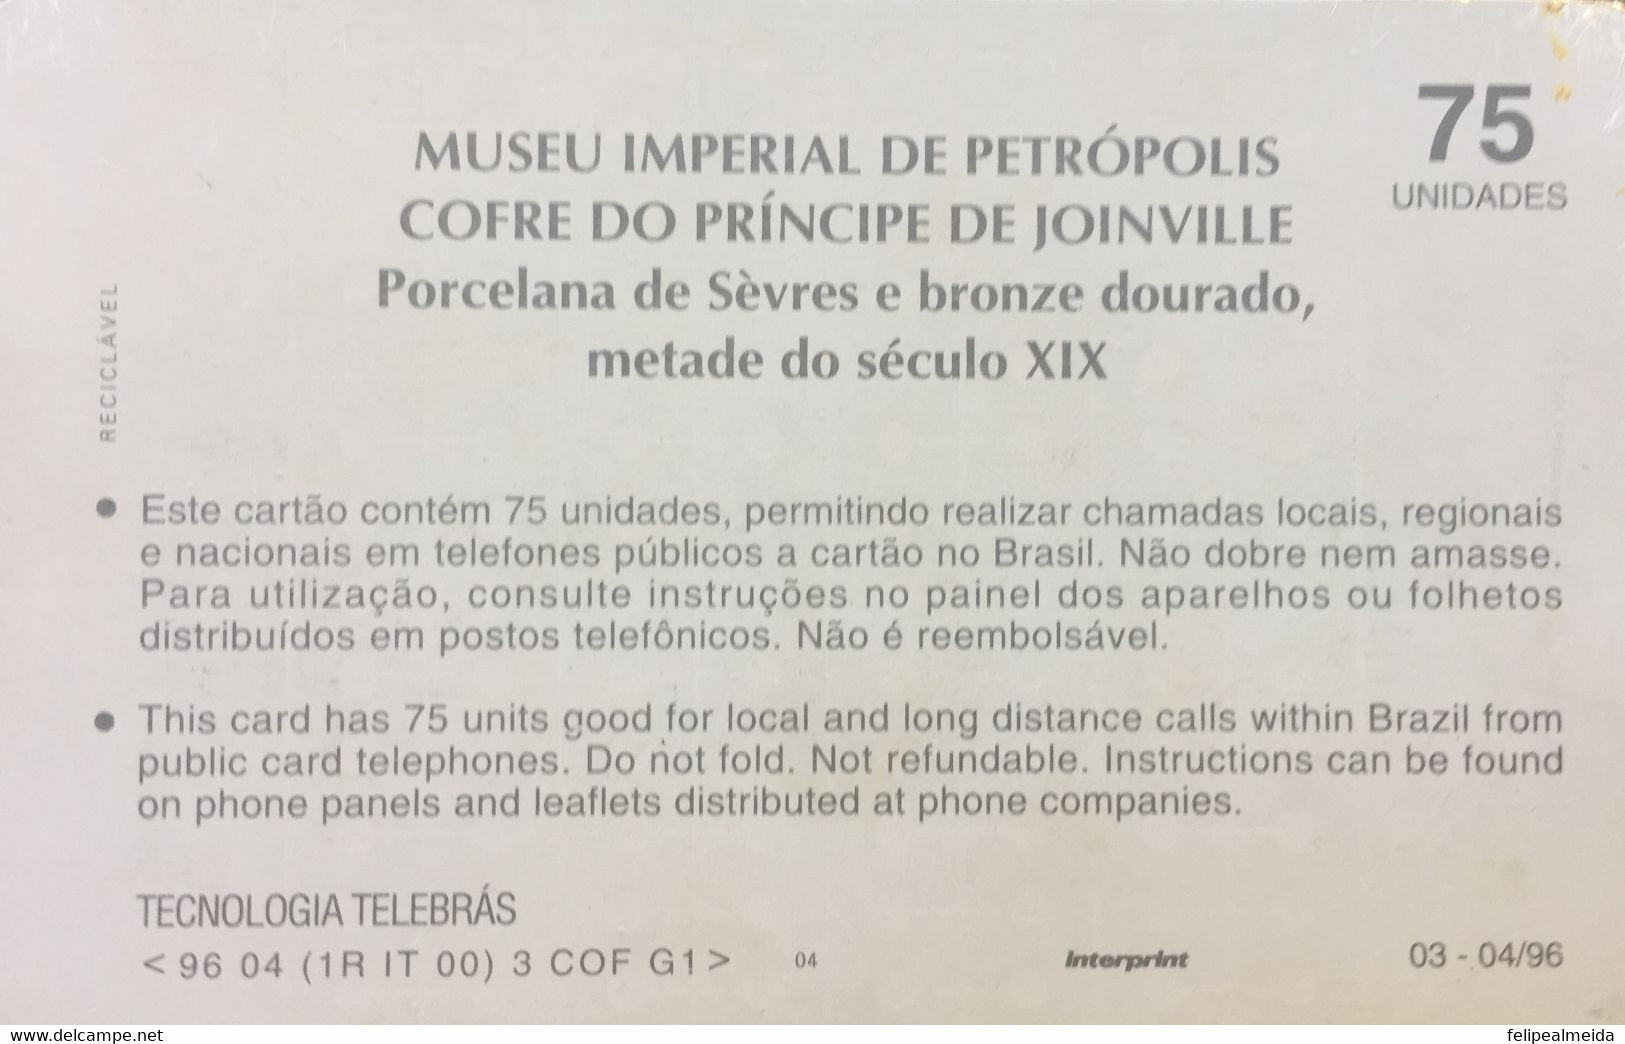 Phone Card Manufactured By Telebras In 1996 - Series Museums - Imperial Museum Of Pretrópolis - Coffer Of The Prince Of - Ontwikkeling